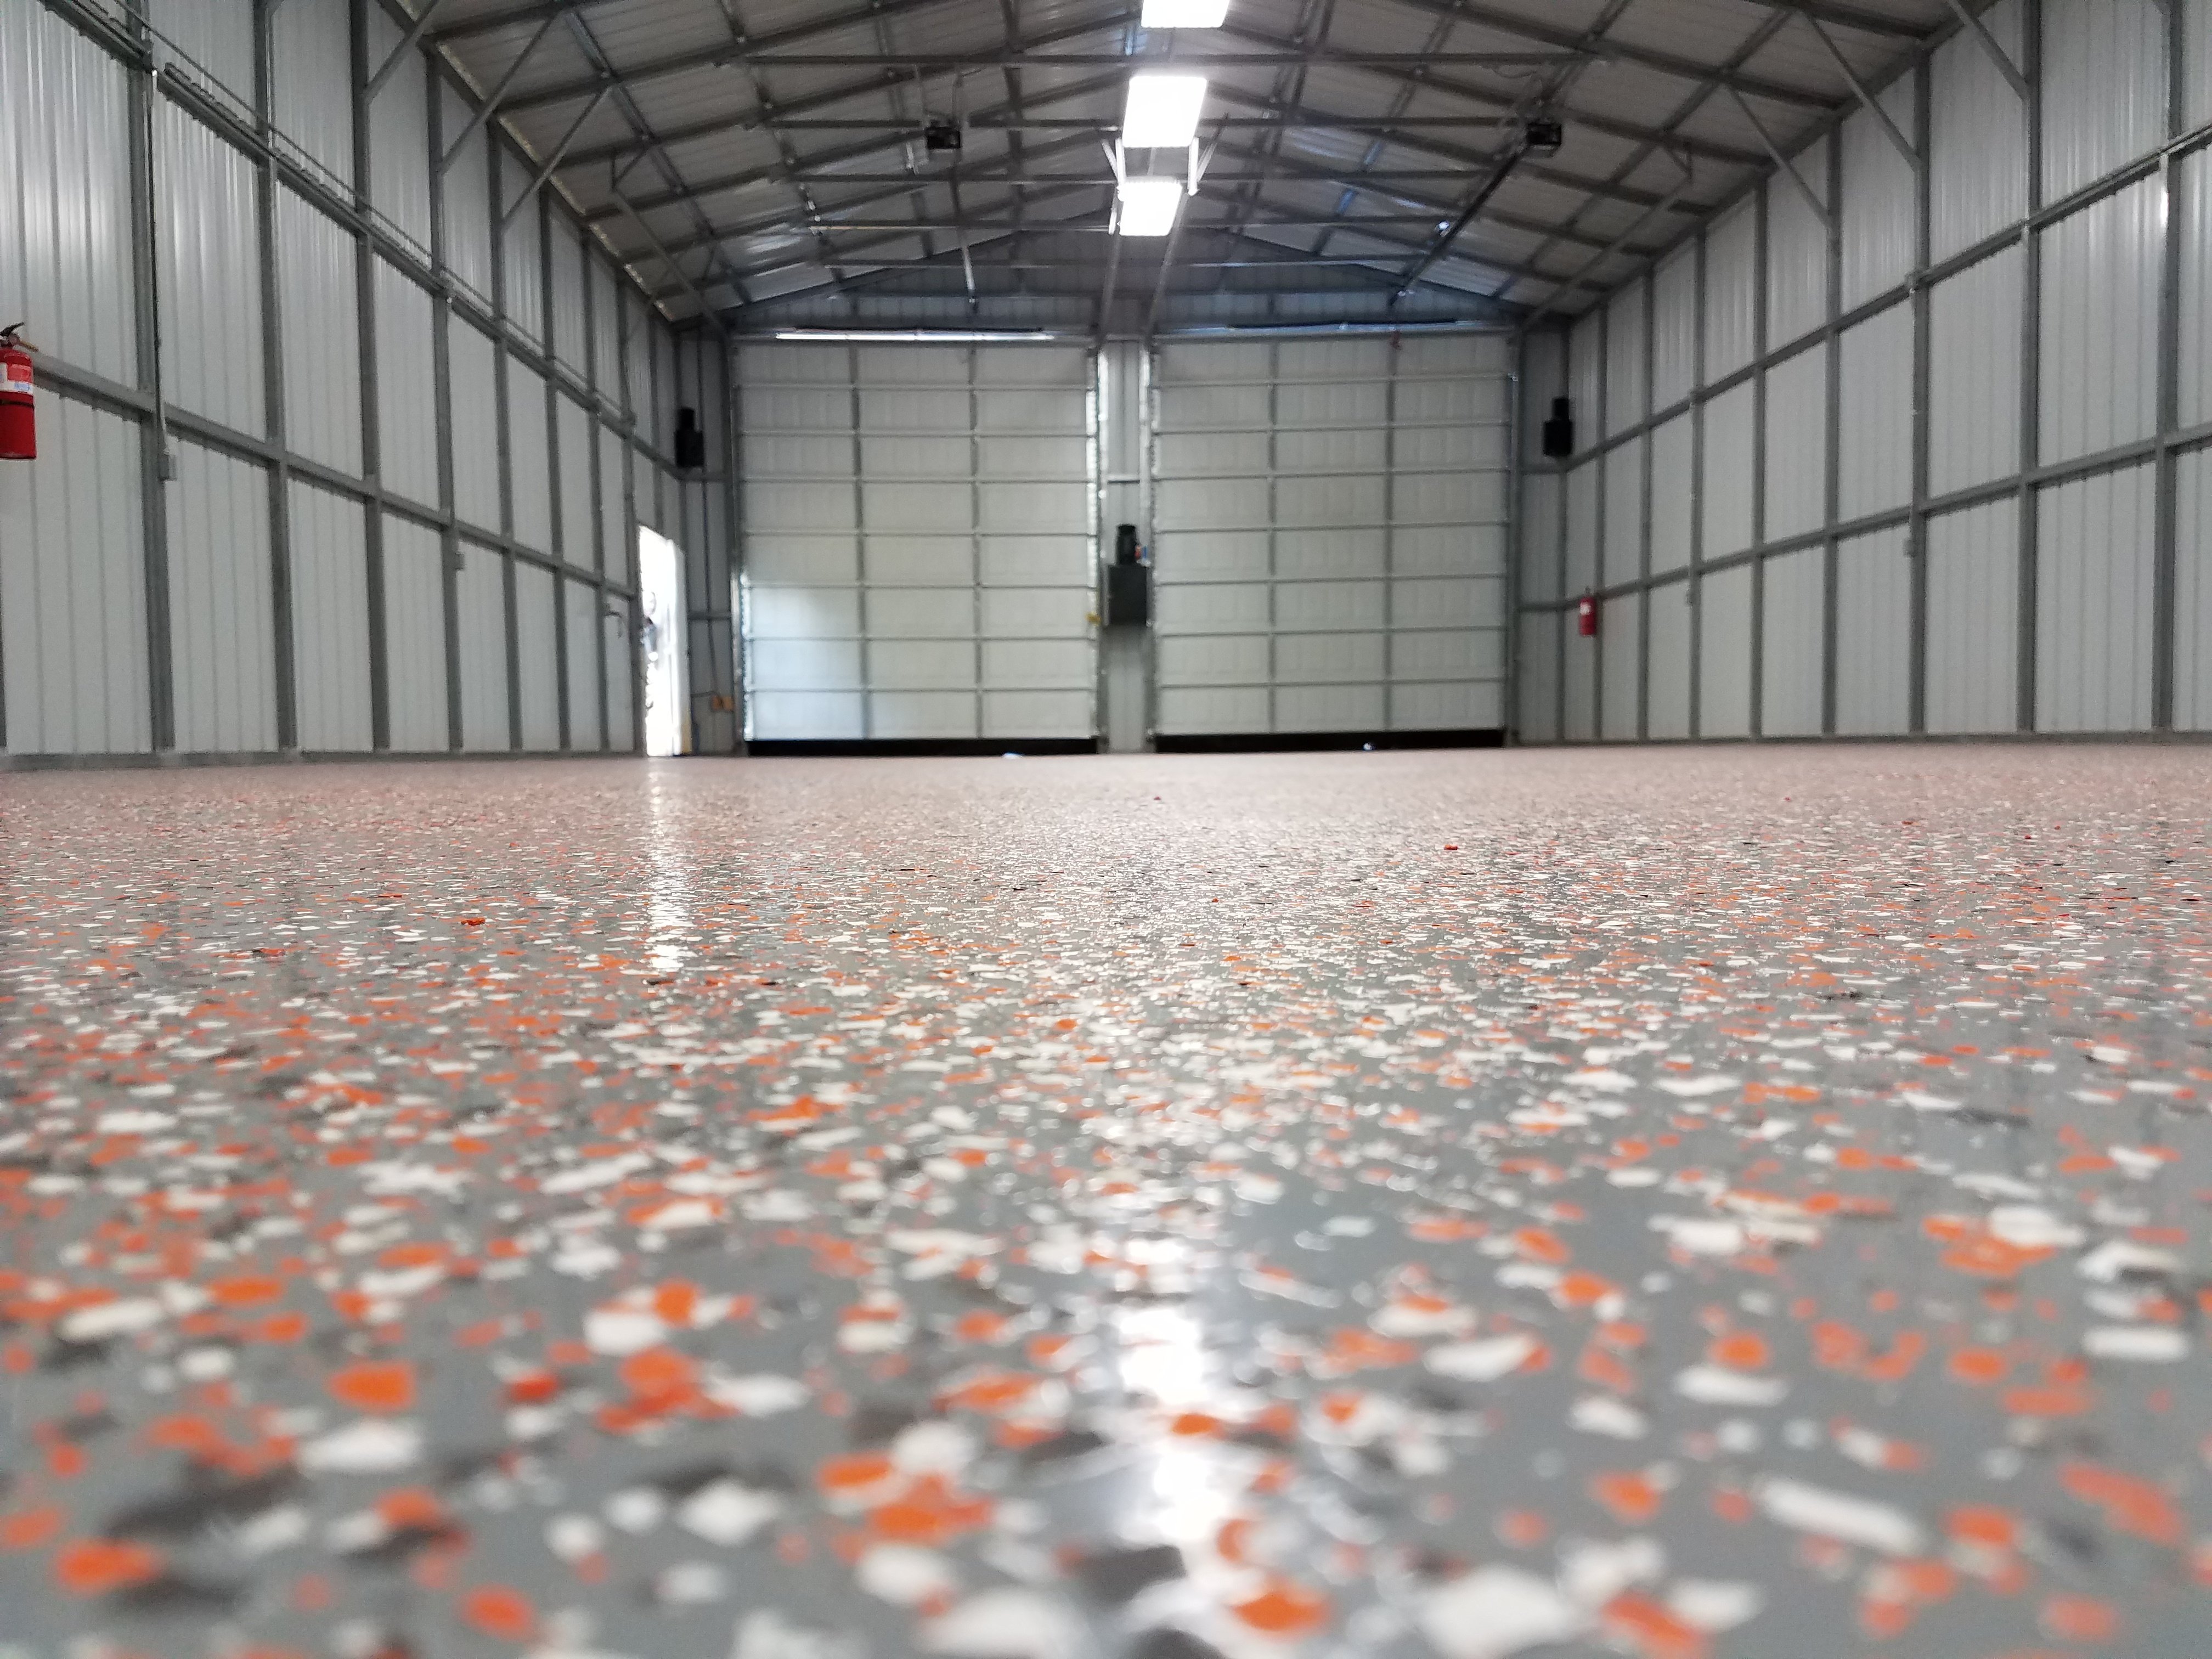 E5 Industrial Epoxy Floor Coating with Colorful Flakes.jpg